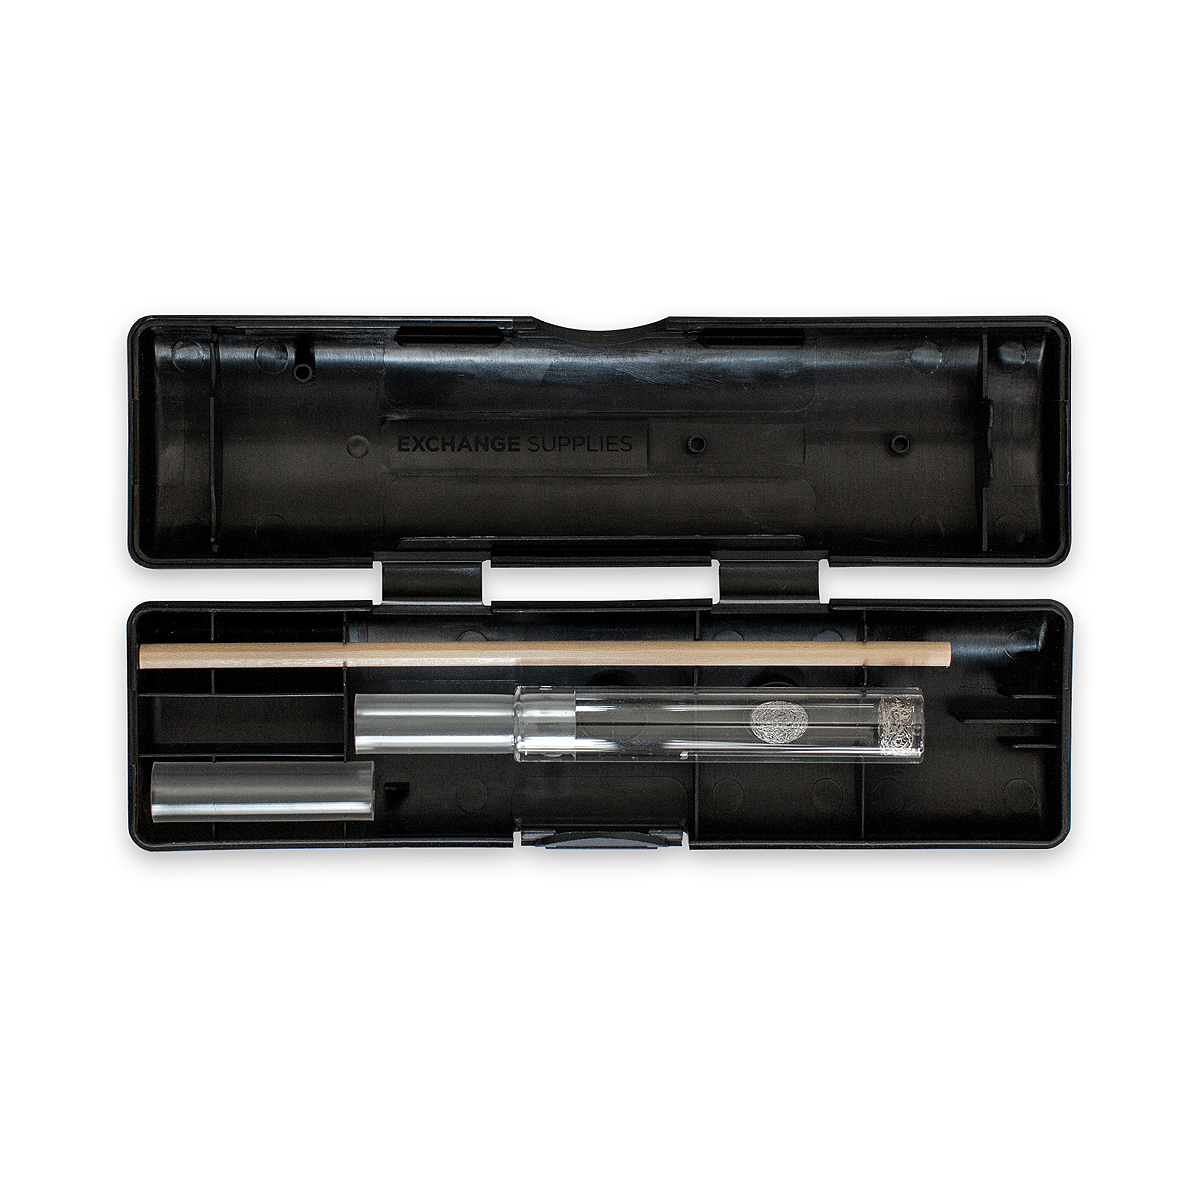 Terpan Short Pipe Kit: 1 Short Straight Pipe, 2 Gauzes, 2 Mouth Pieces, in a Plastic Case